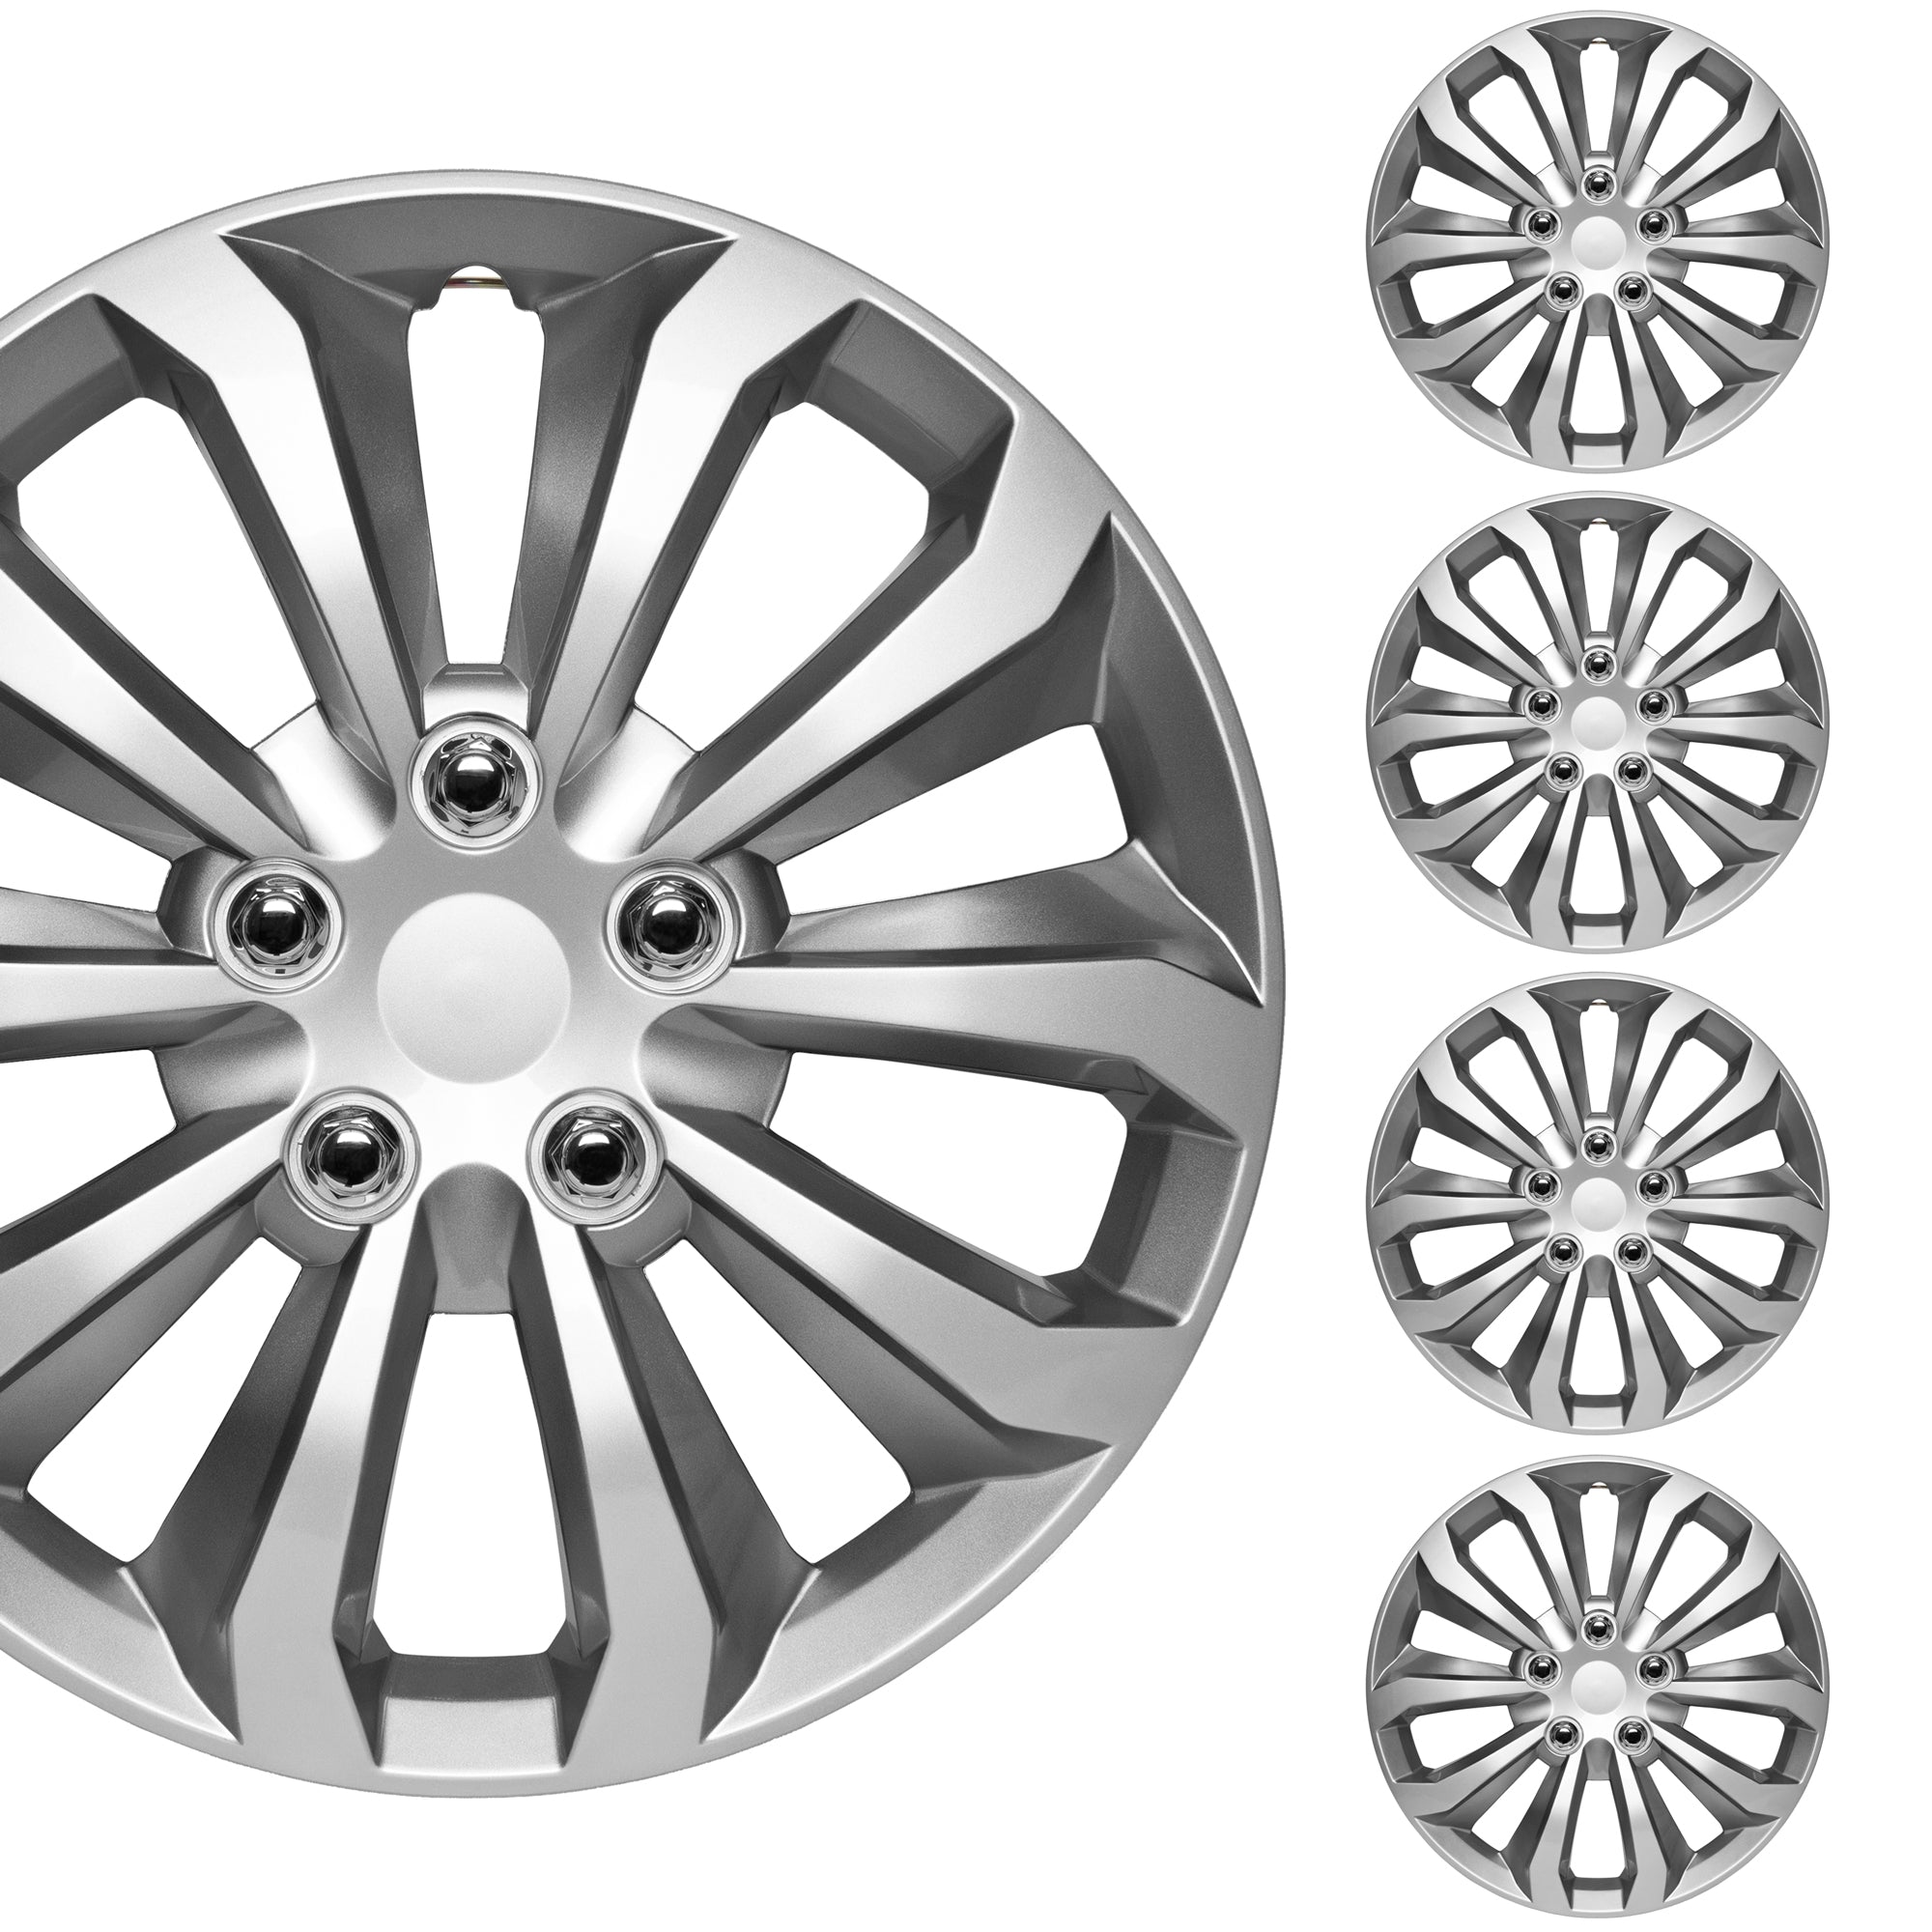 BDK Hubcaps Wheel Covers for Cars Premium Silver and GunMetal Hubcaps 16" Wheel Rim Cover Replacement Snap On Hubcaps for Toyota Camry Corolla Style Automotive (4-Pack)